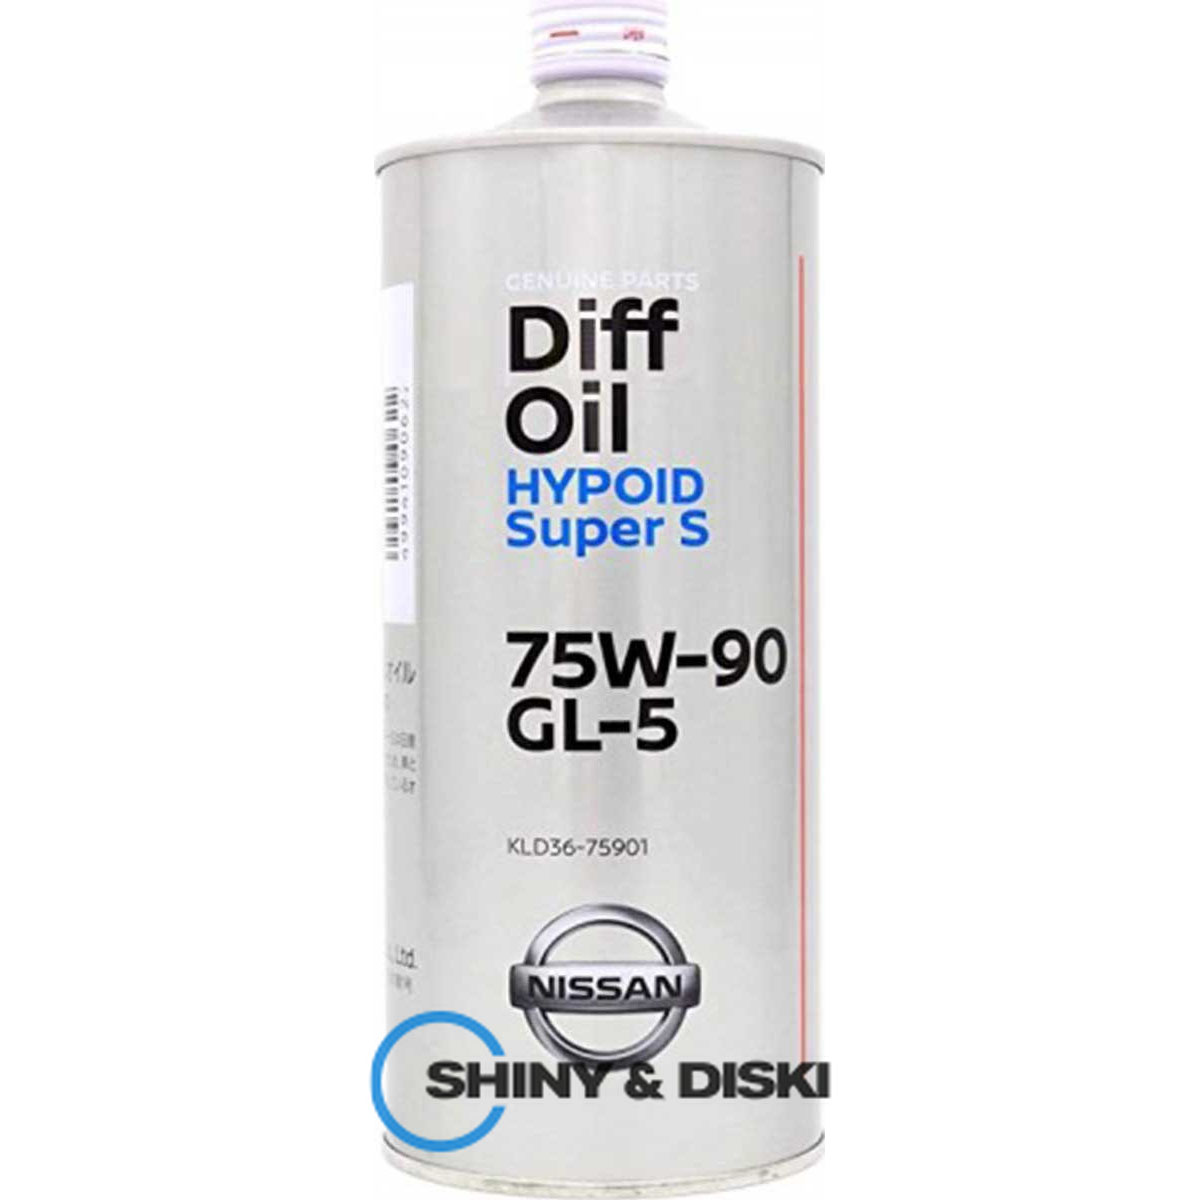 nissan diff oil hypoid super s